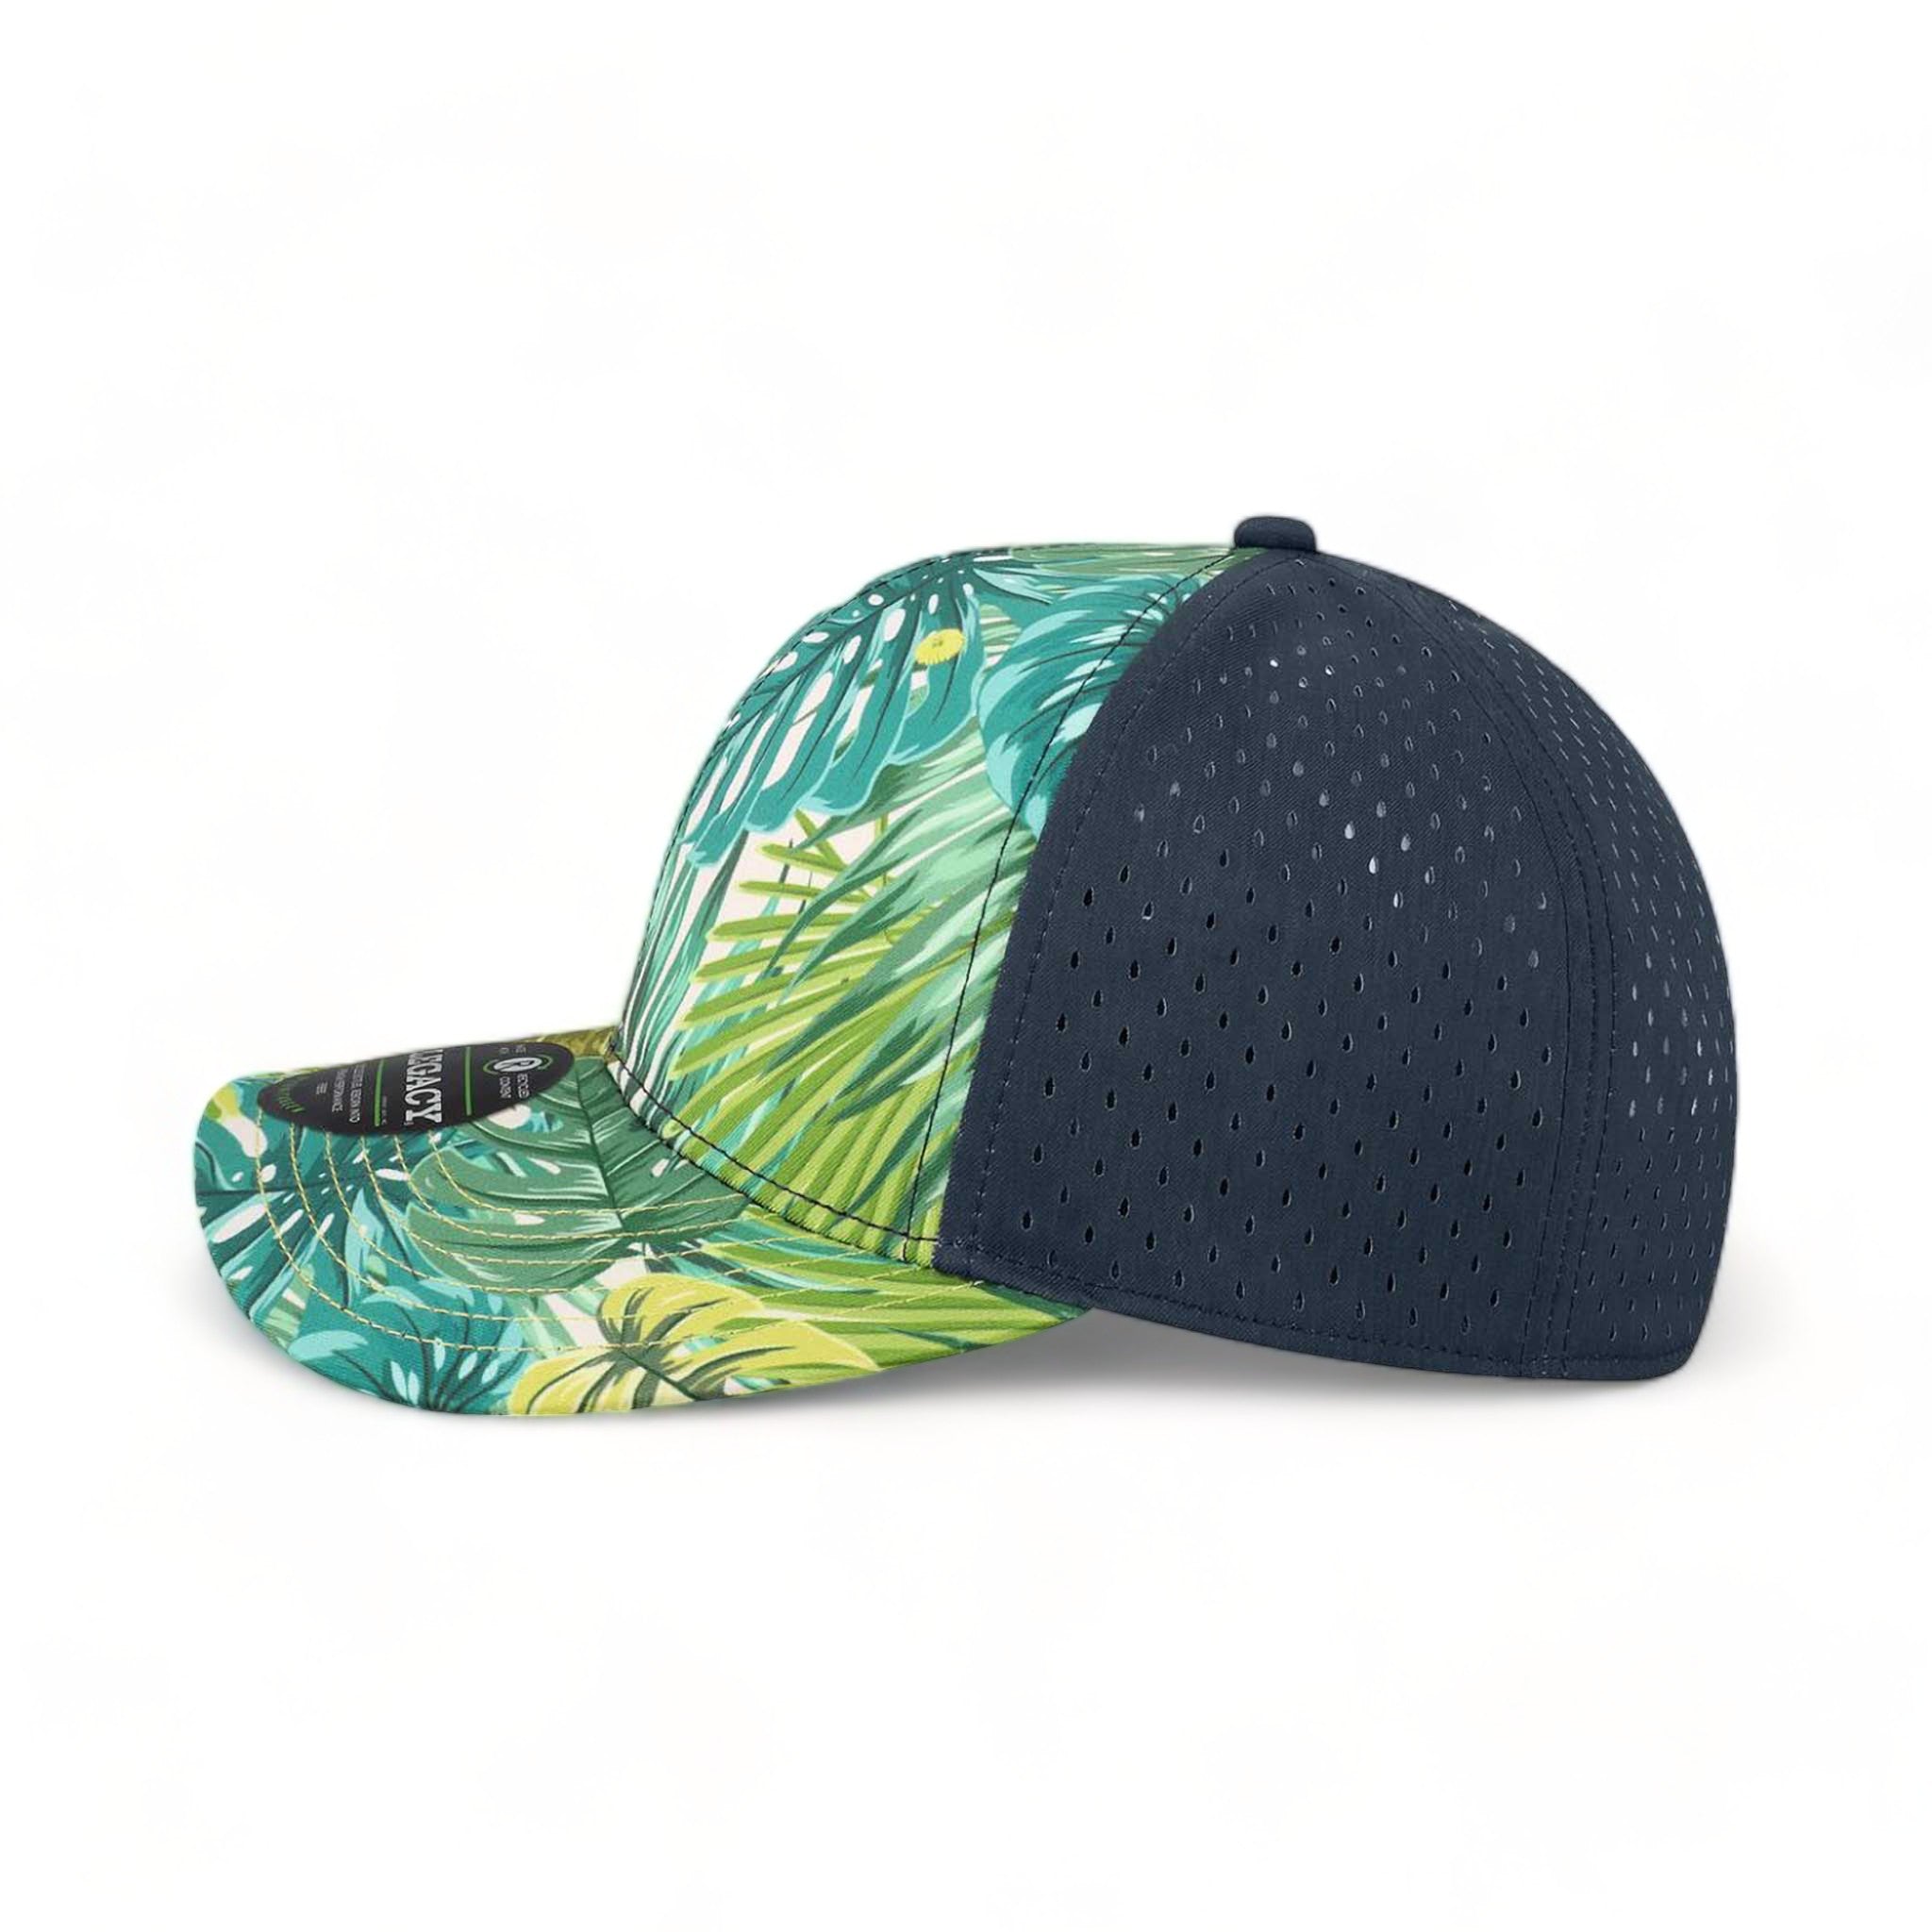 Side view of LEGACY REMPA custom hat in tropical blue leaves and navy